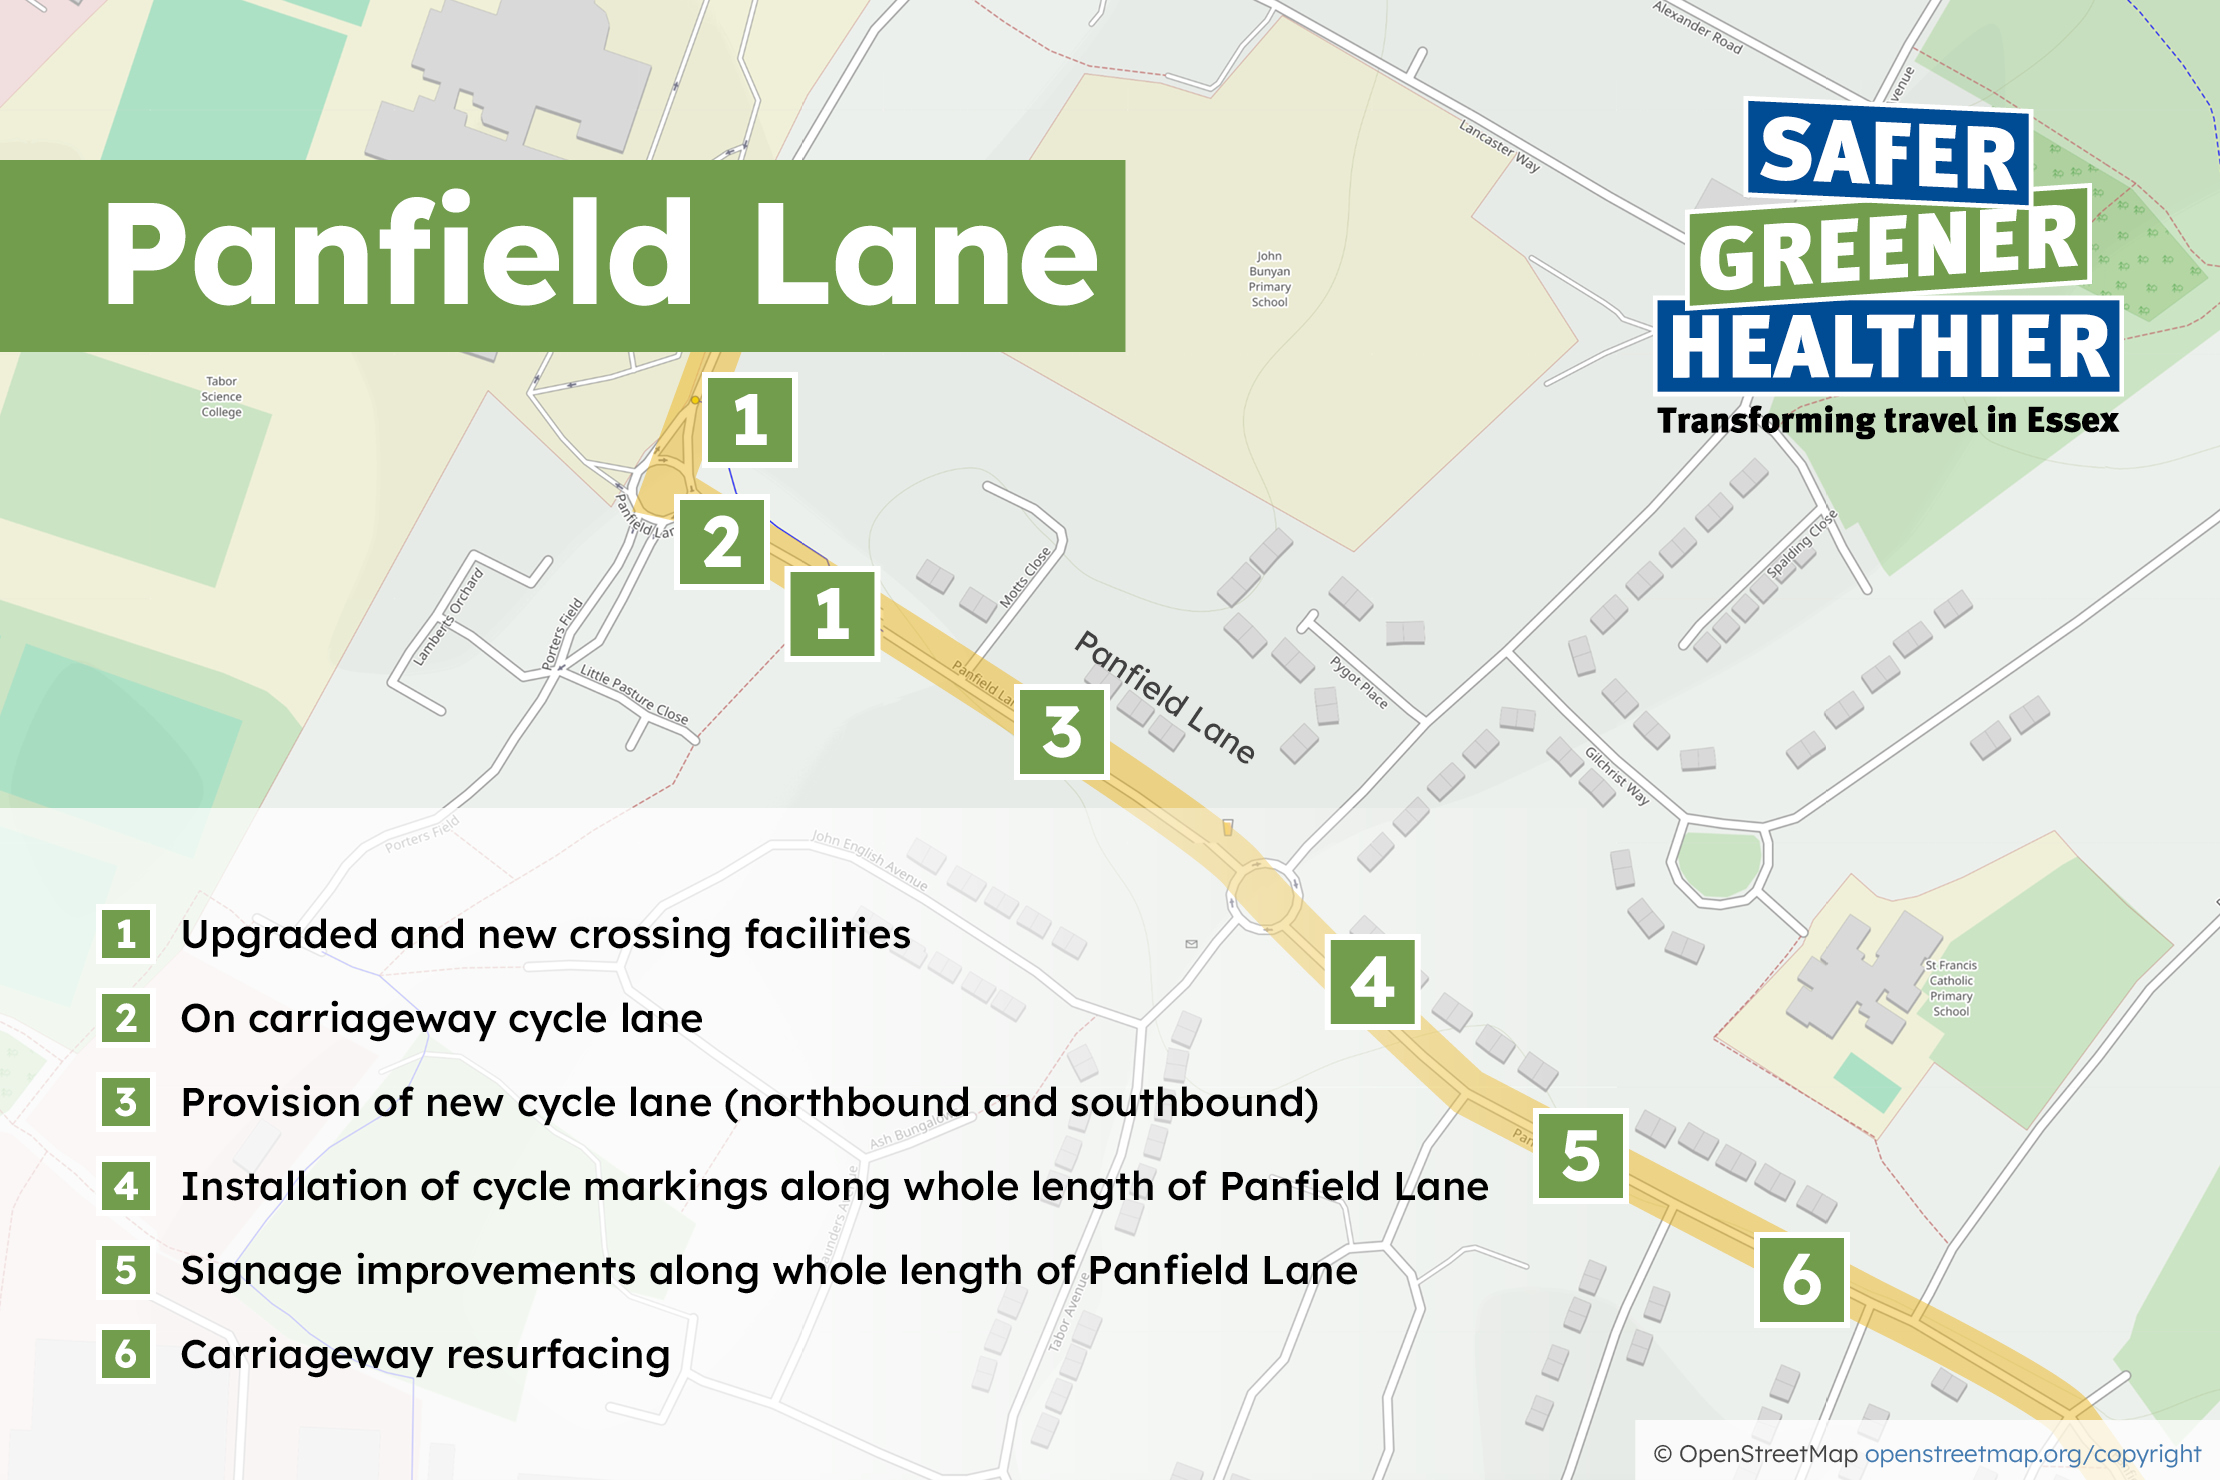 1. Upgraded and new crossing facilities 2. On carriageway cycle lane 3. Provision of new cycle lane (northbound and southbound) 4. Installation of cycle markings along whole length of Panfield Lane 5. Signage improvements along whole length of Panfield Lane 6. Carriageway resurfacing